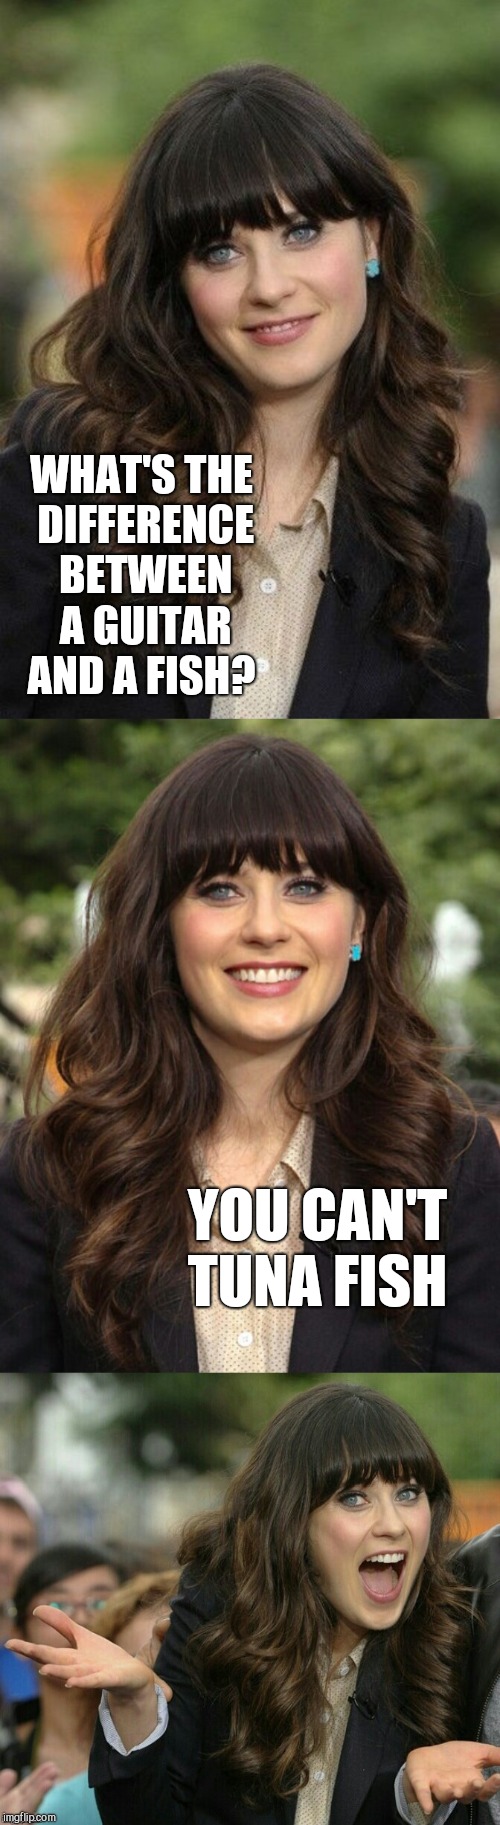 Zooey Deschanel joke template. | WHAT'S THE DIFFERENCE BETWEEN A GUITAR AND A FISH? YOU CAN'T TUNA FISH | image tagged in zooey deschanel joke template,jbmemegeek,bad puns,zooey deschanel | made w/ Imgflip meme maker